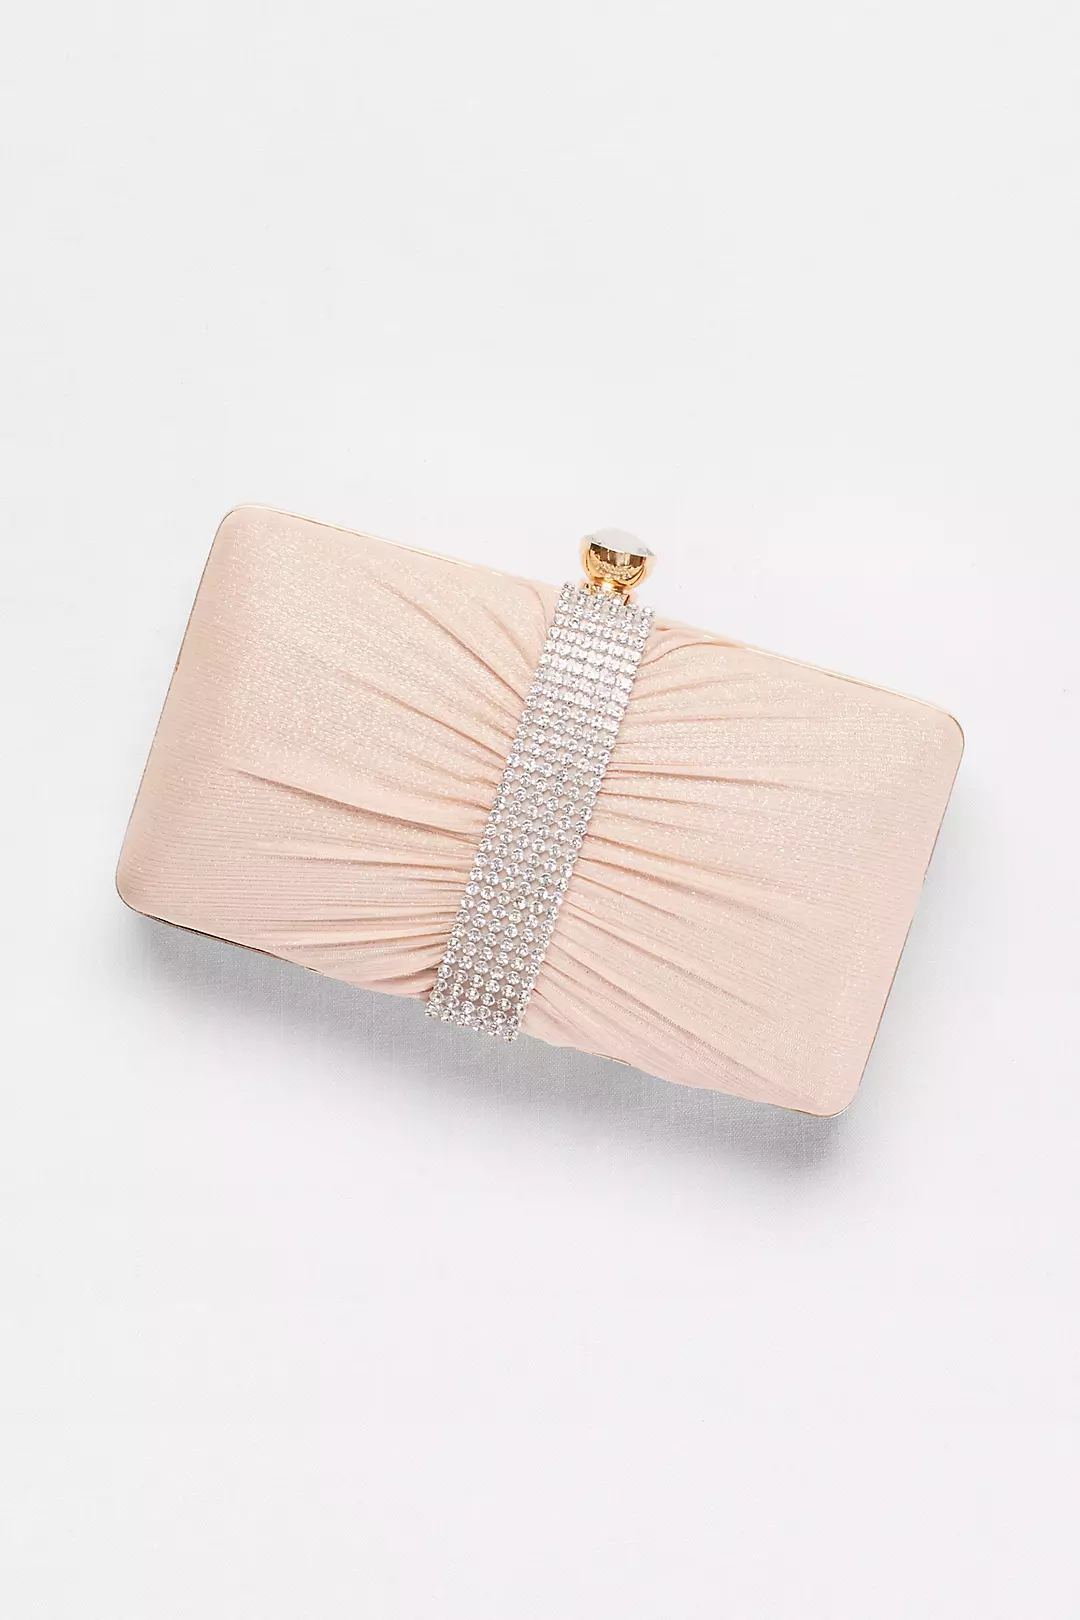 Shimmer Mesh and Rhinestone Clutch Image